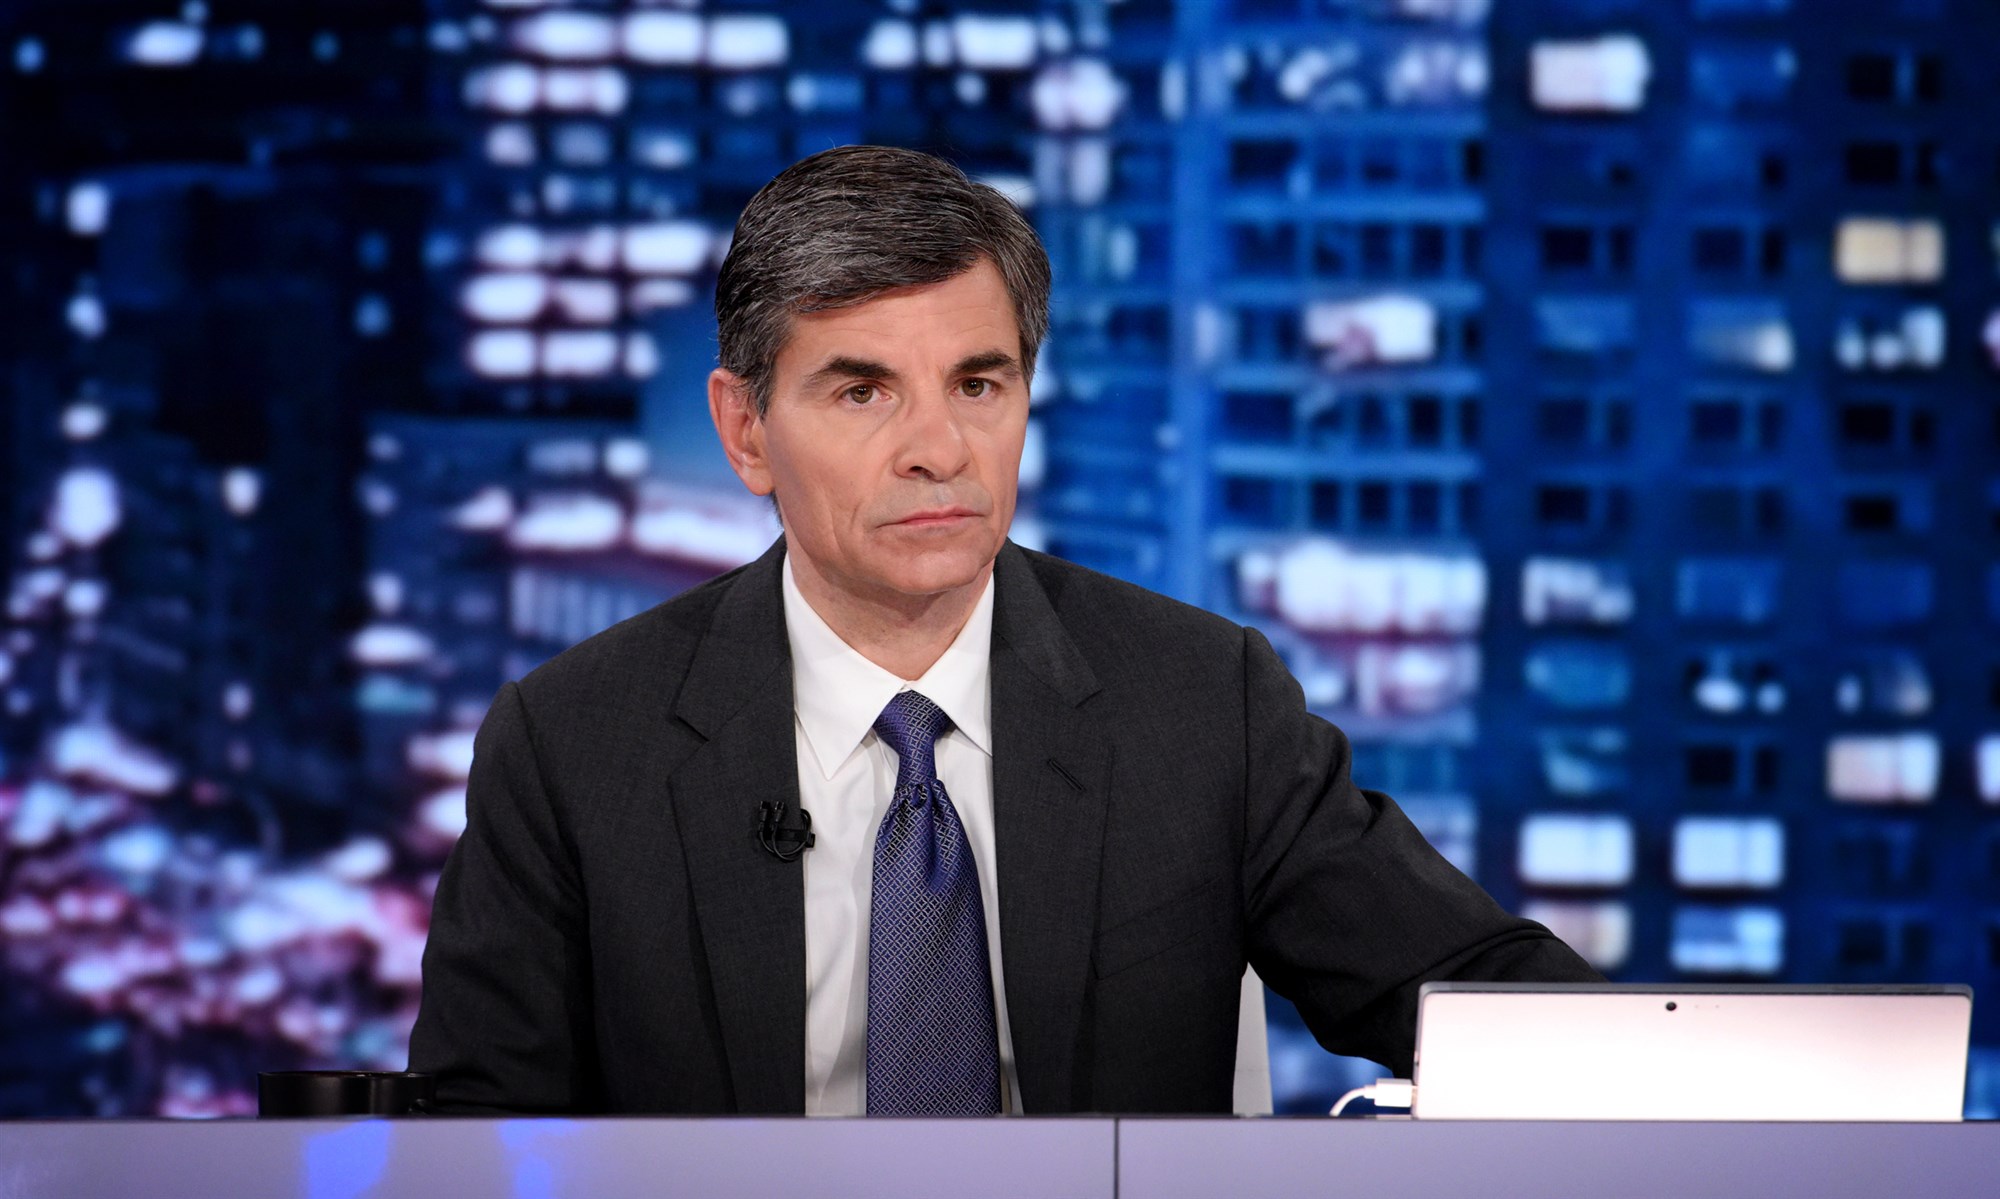 ABC’s ‘Good Morning America’ anchor George Stephanopoulos tests positive for coronavirus